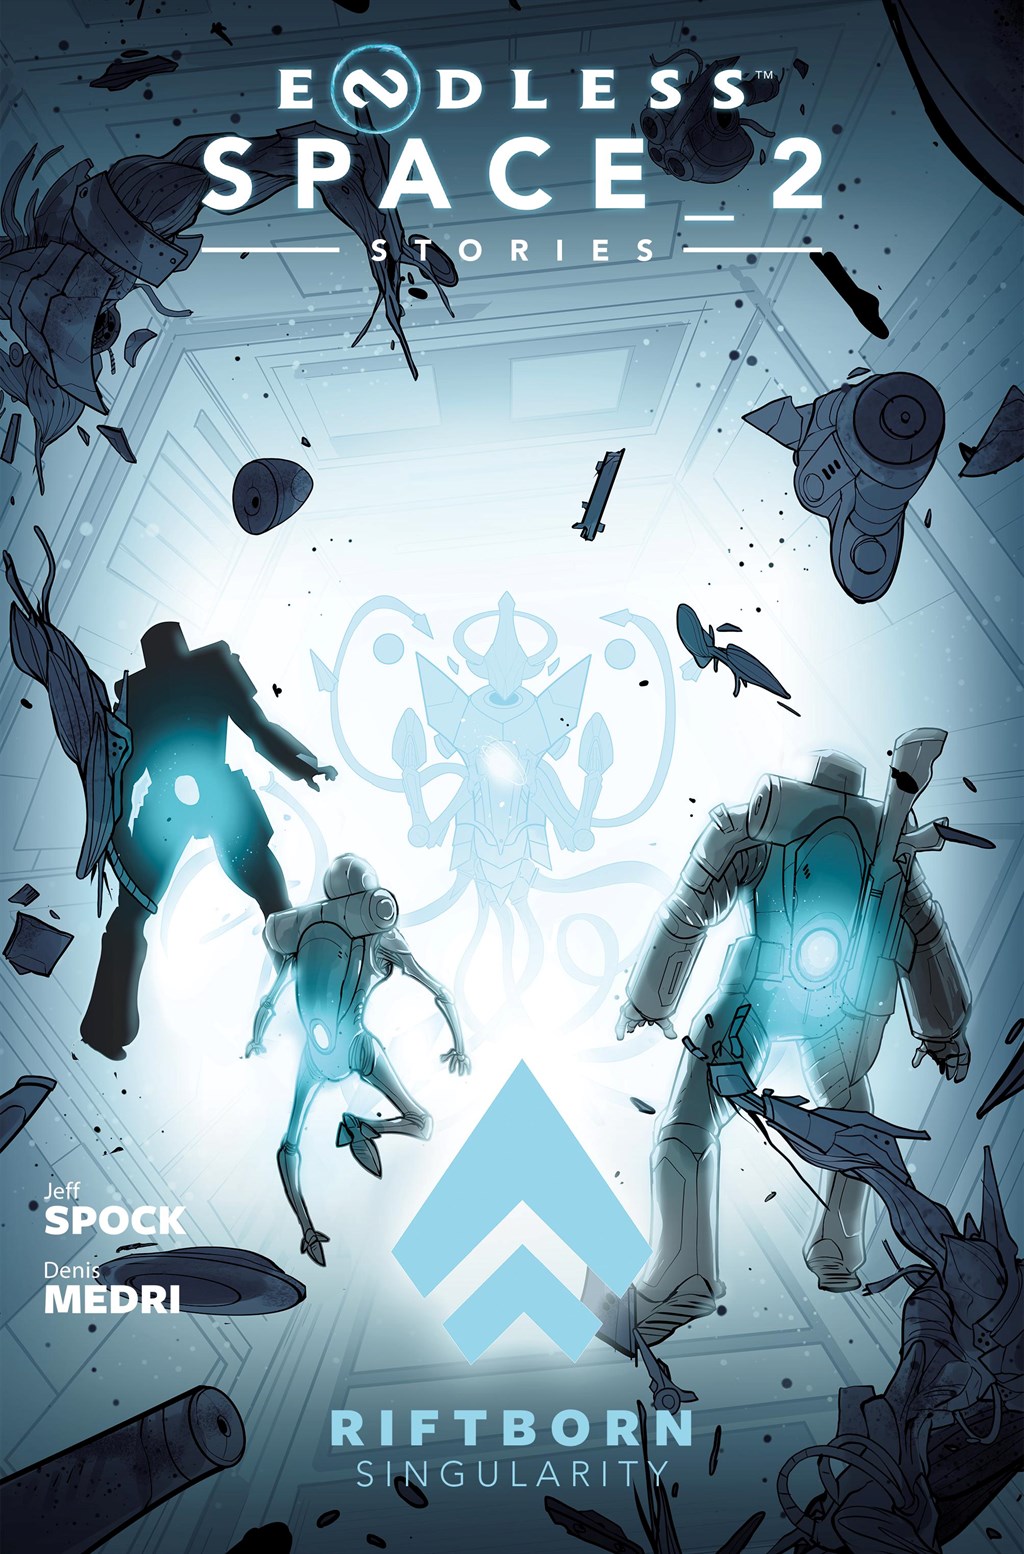 Read online Endless Space 2: Stories comic -  Issue # TPB - 119